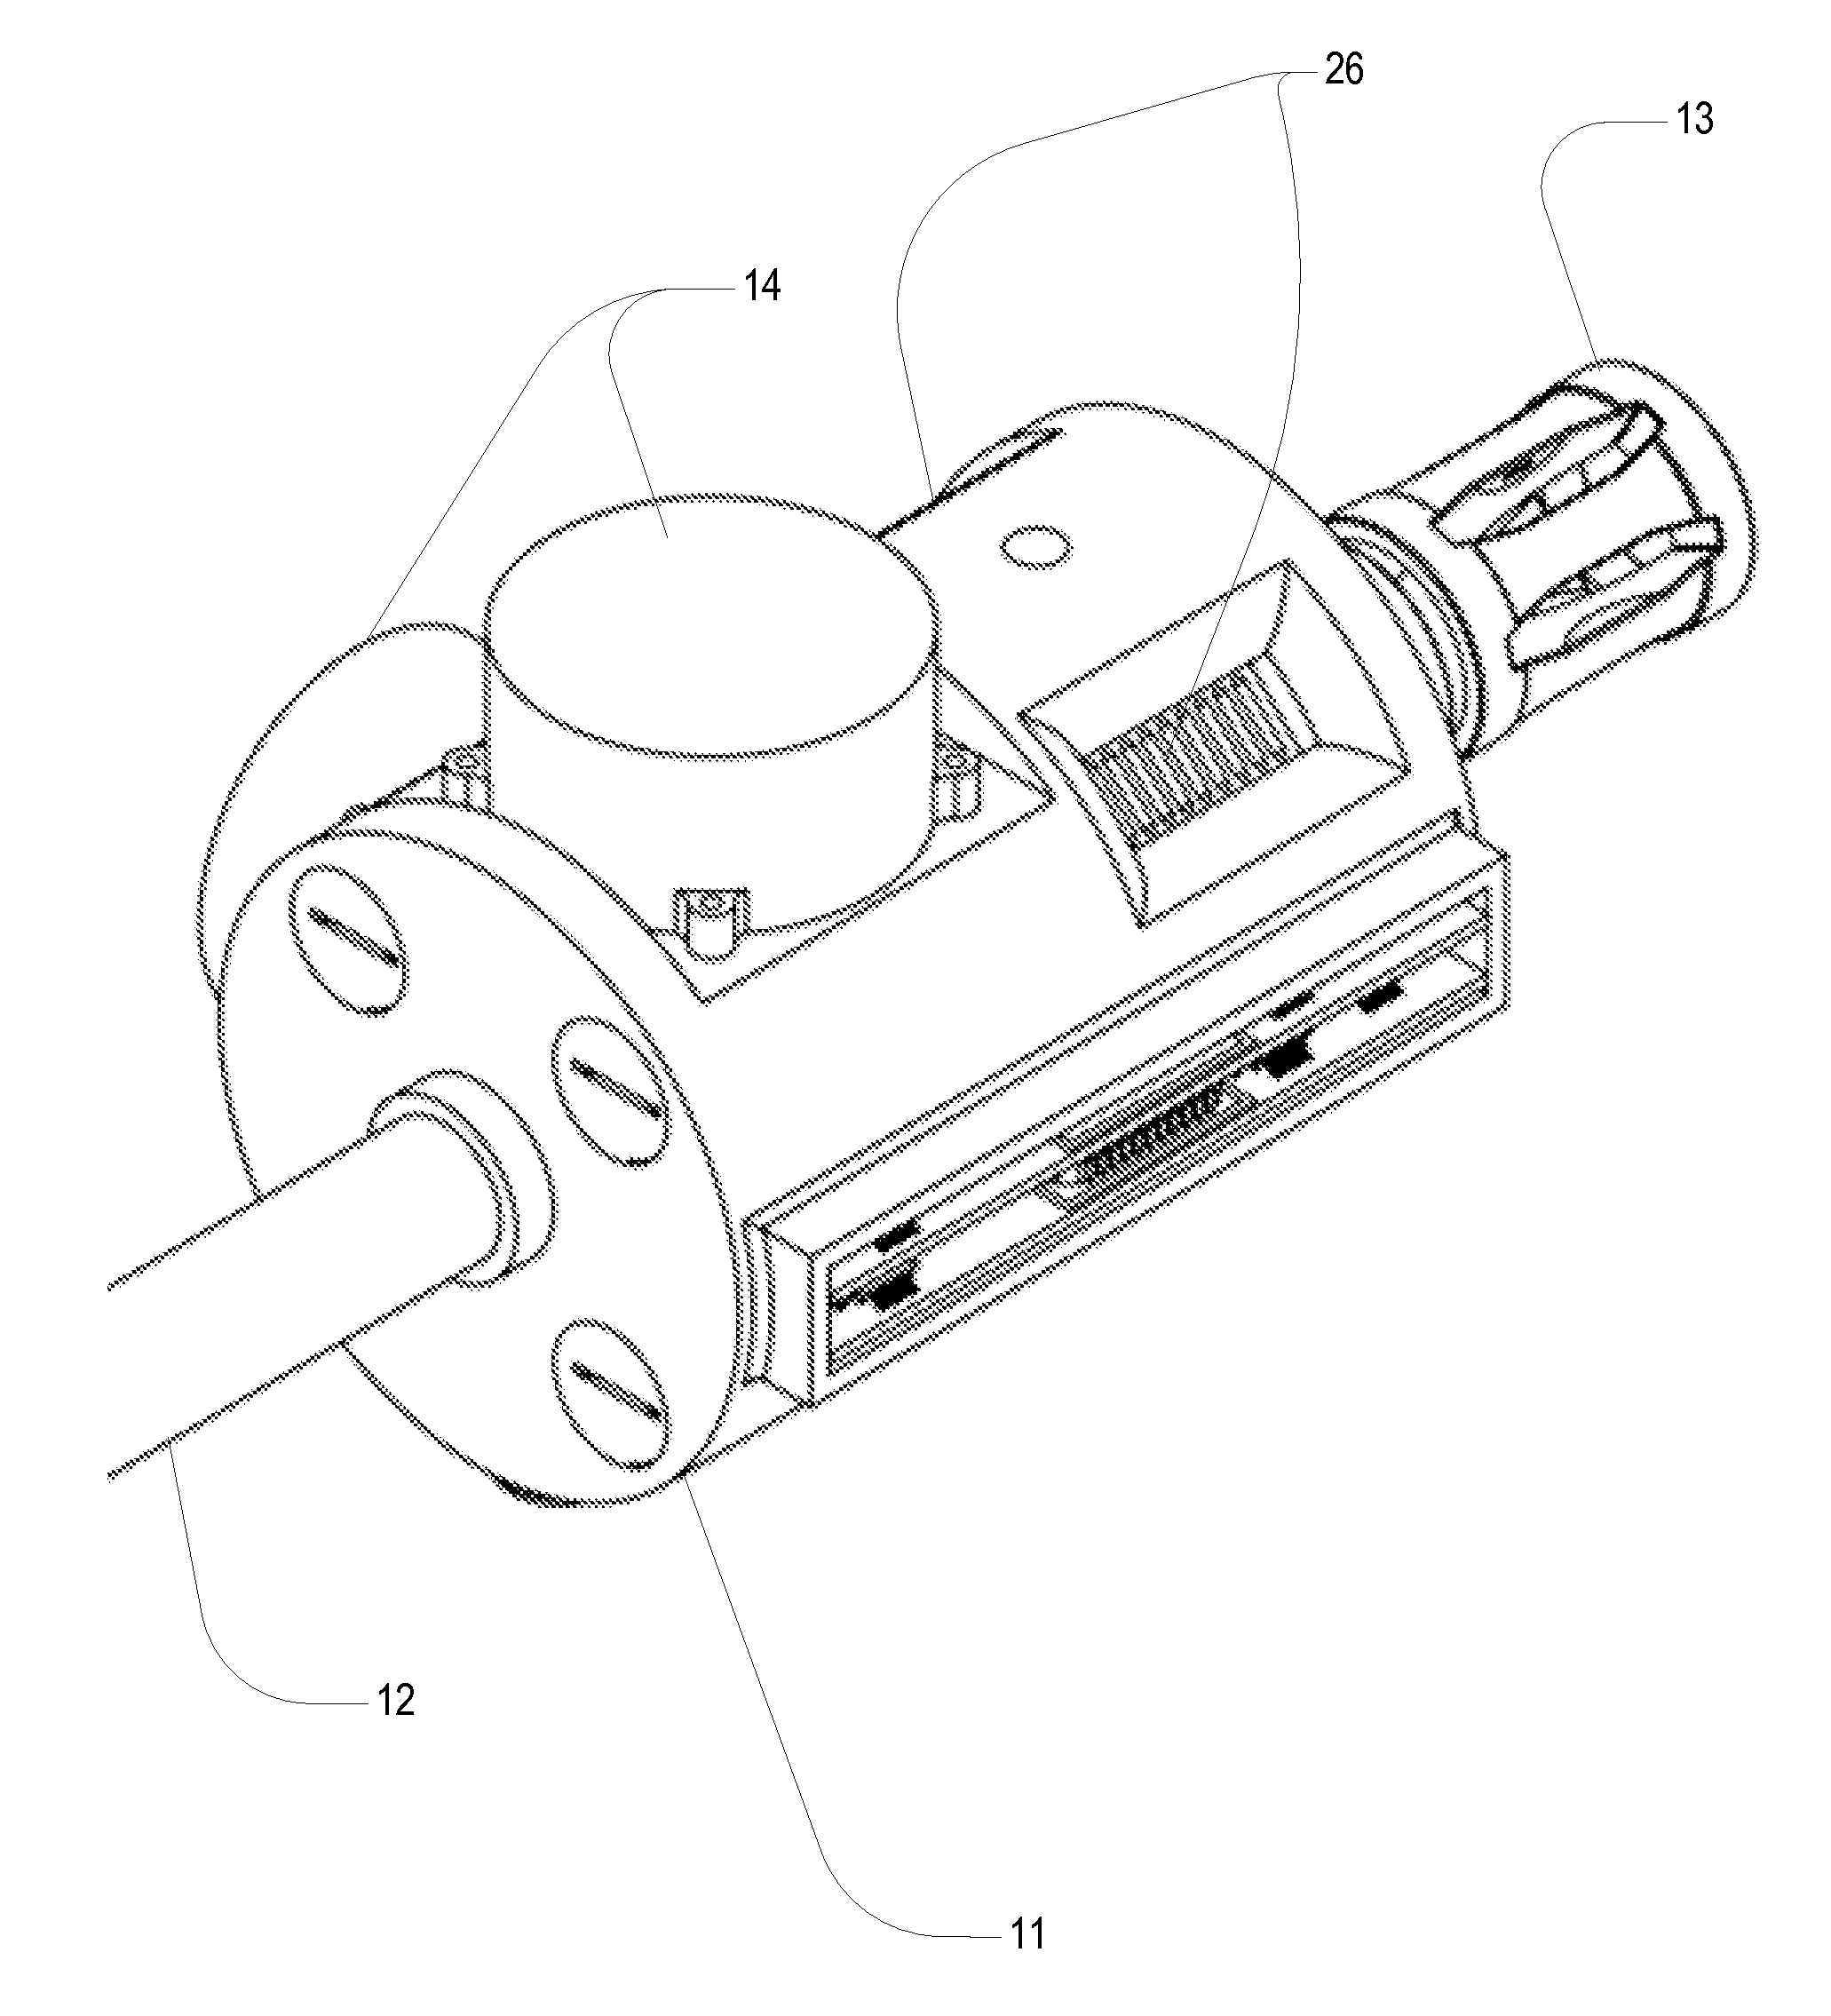 Feedback-controlled re-targeting apparatus for automatic firearm